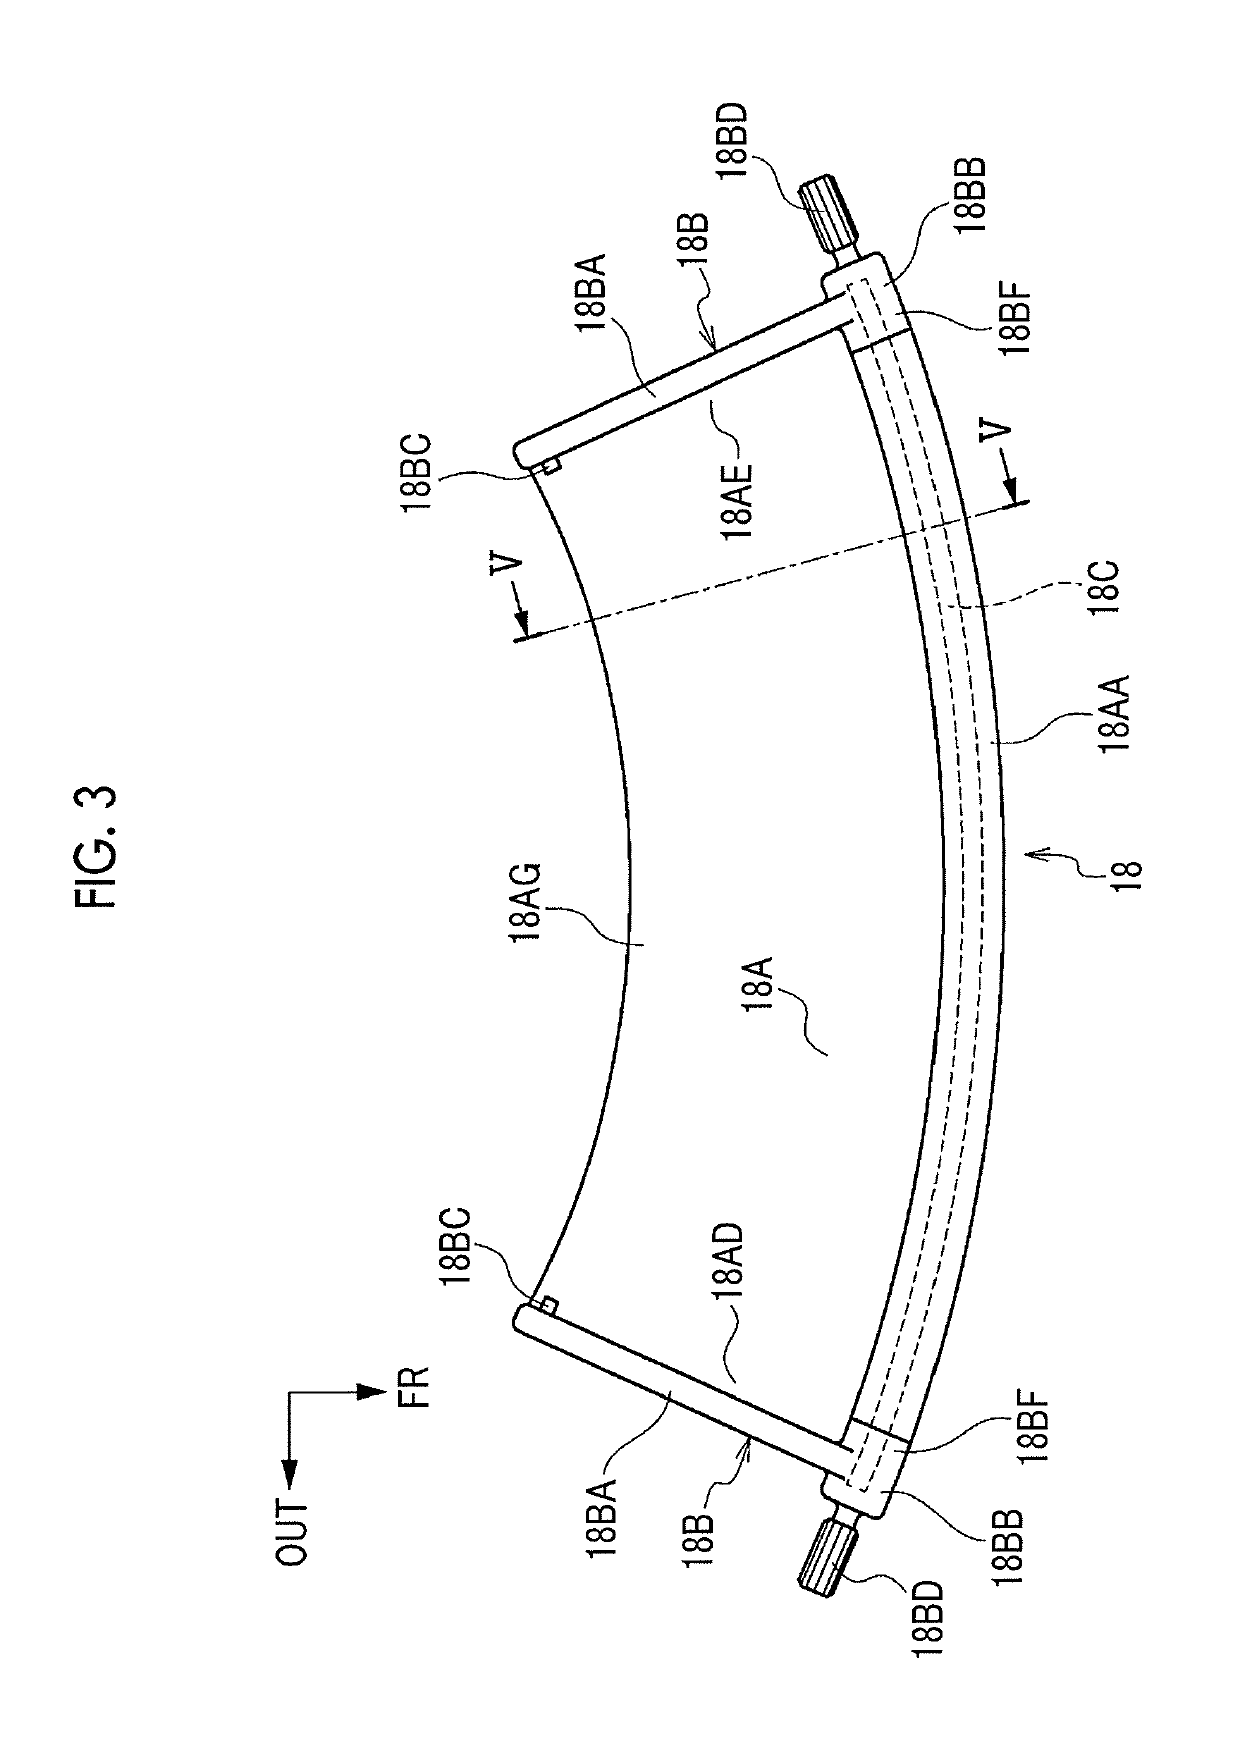 Grille shutter device